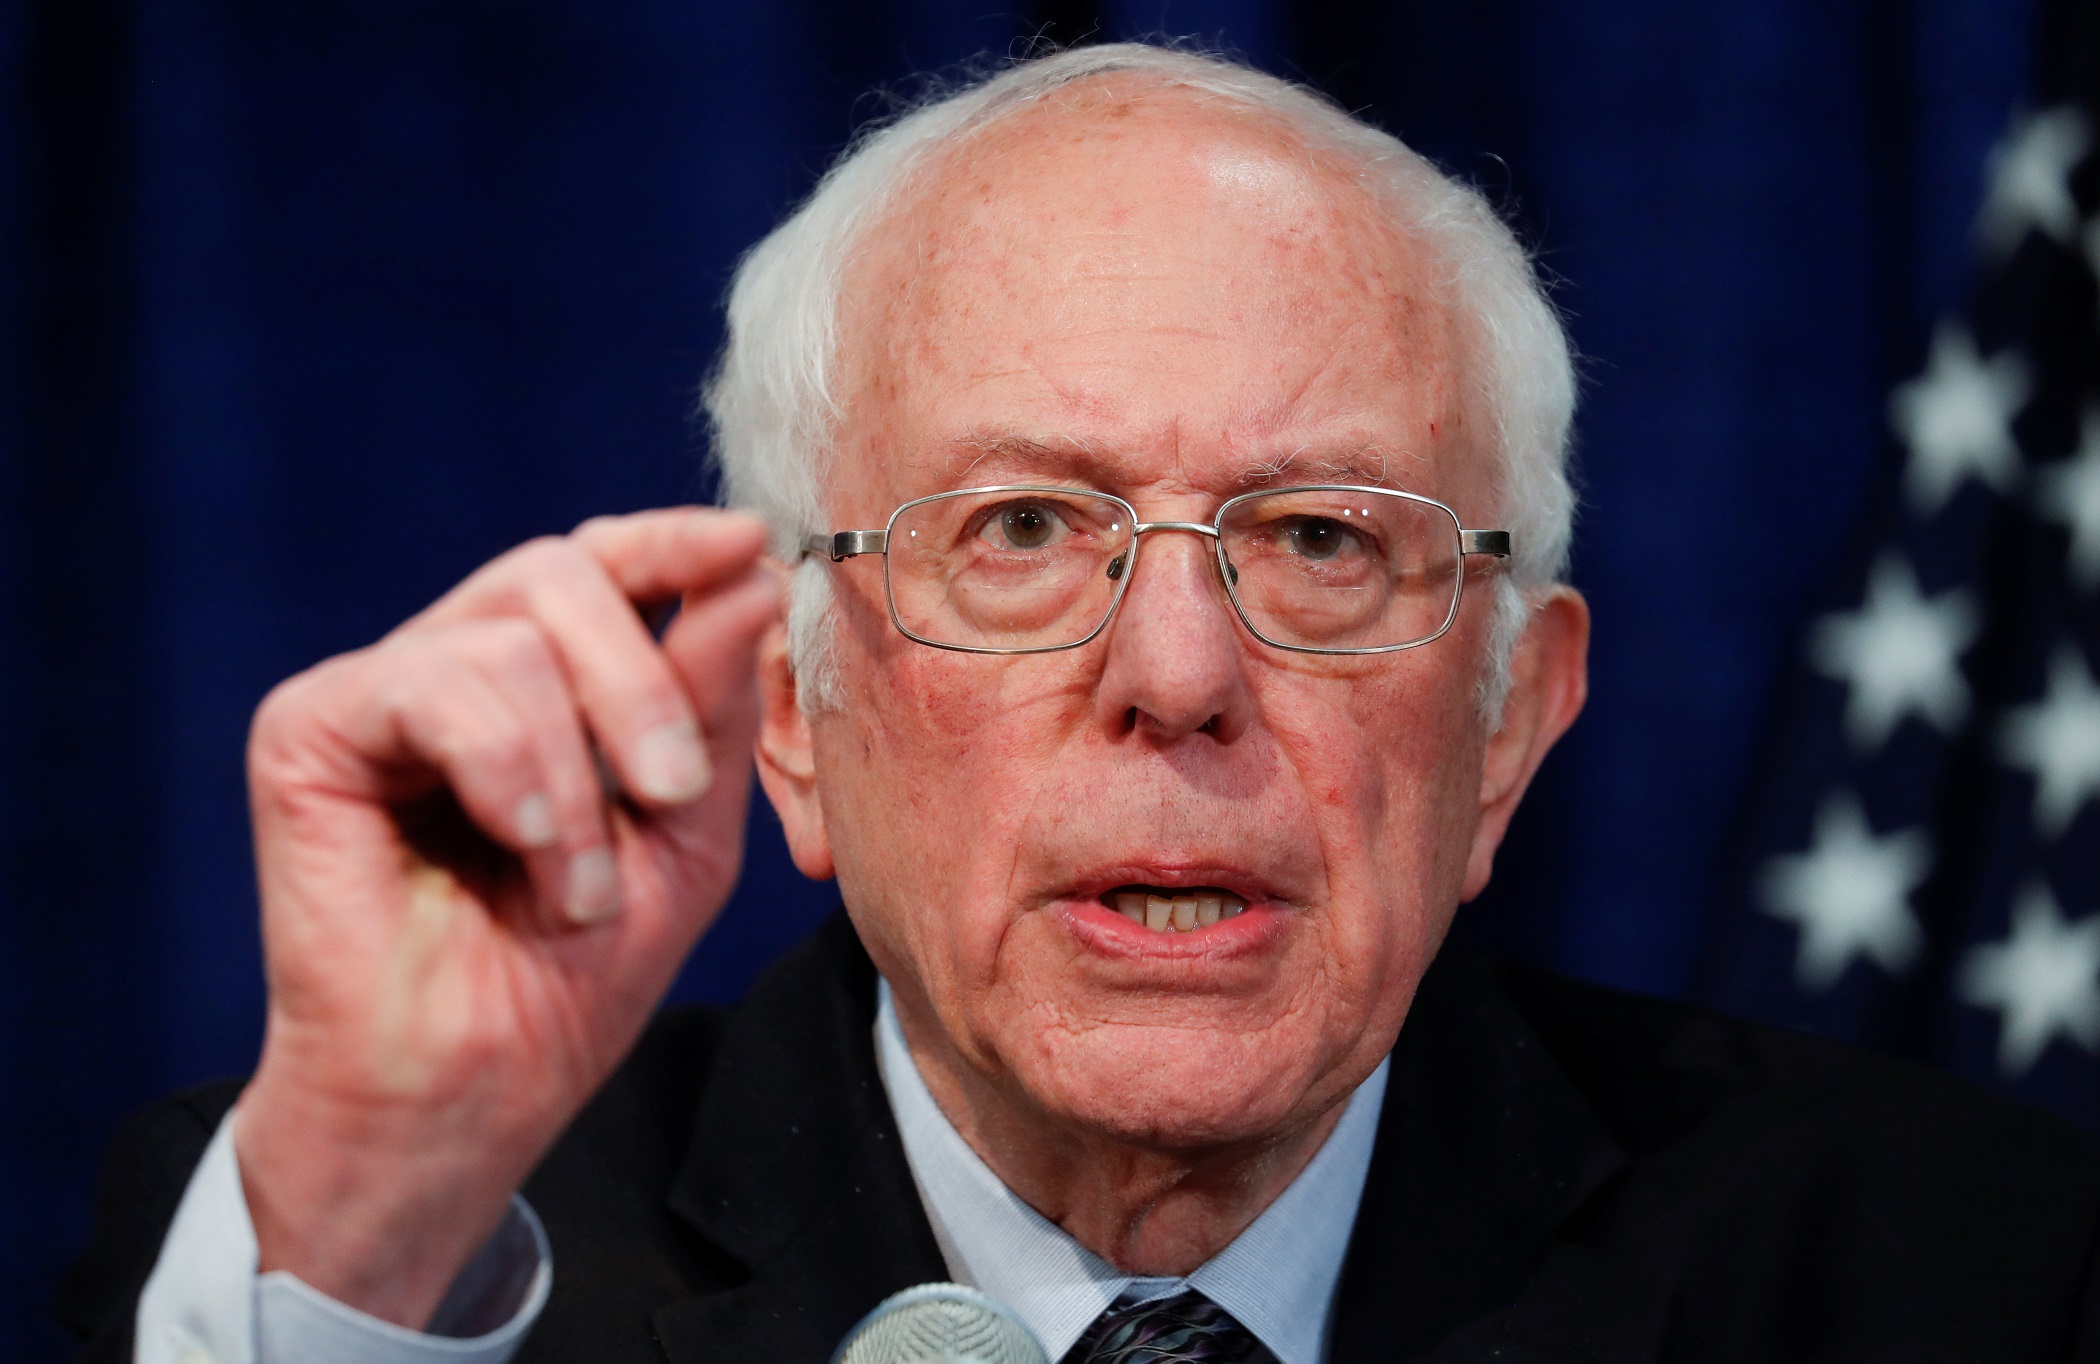 bernie-sanders-has-big-plans-for-a-massive-tax-increase-the-national